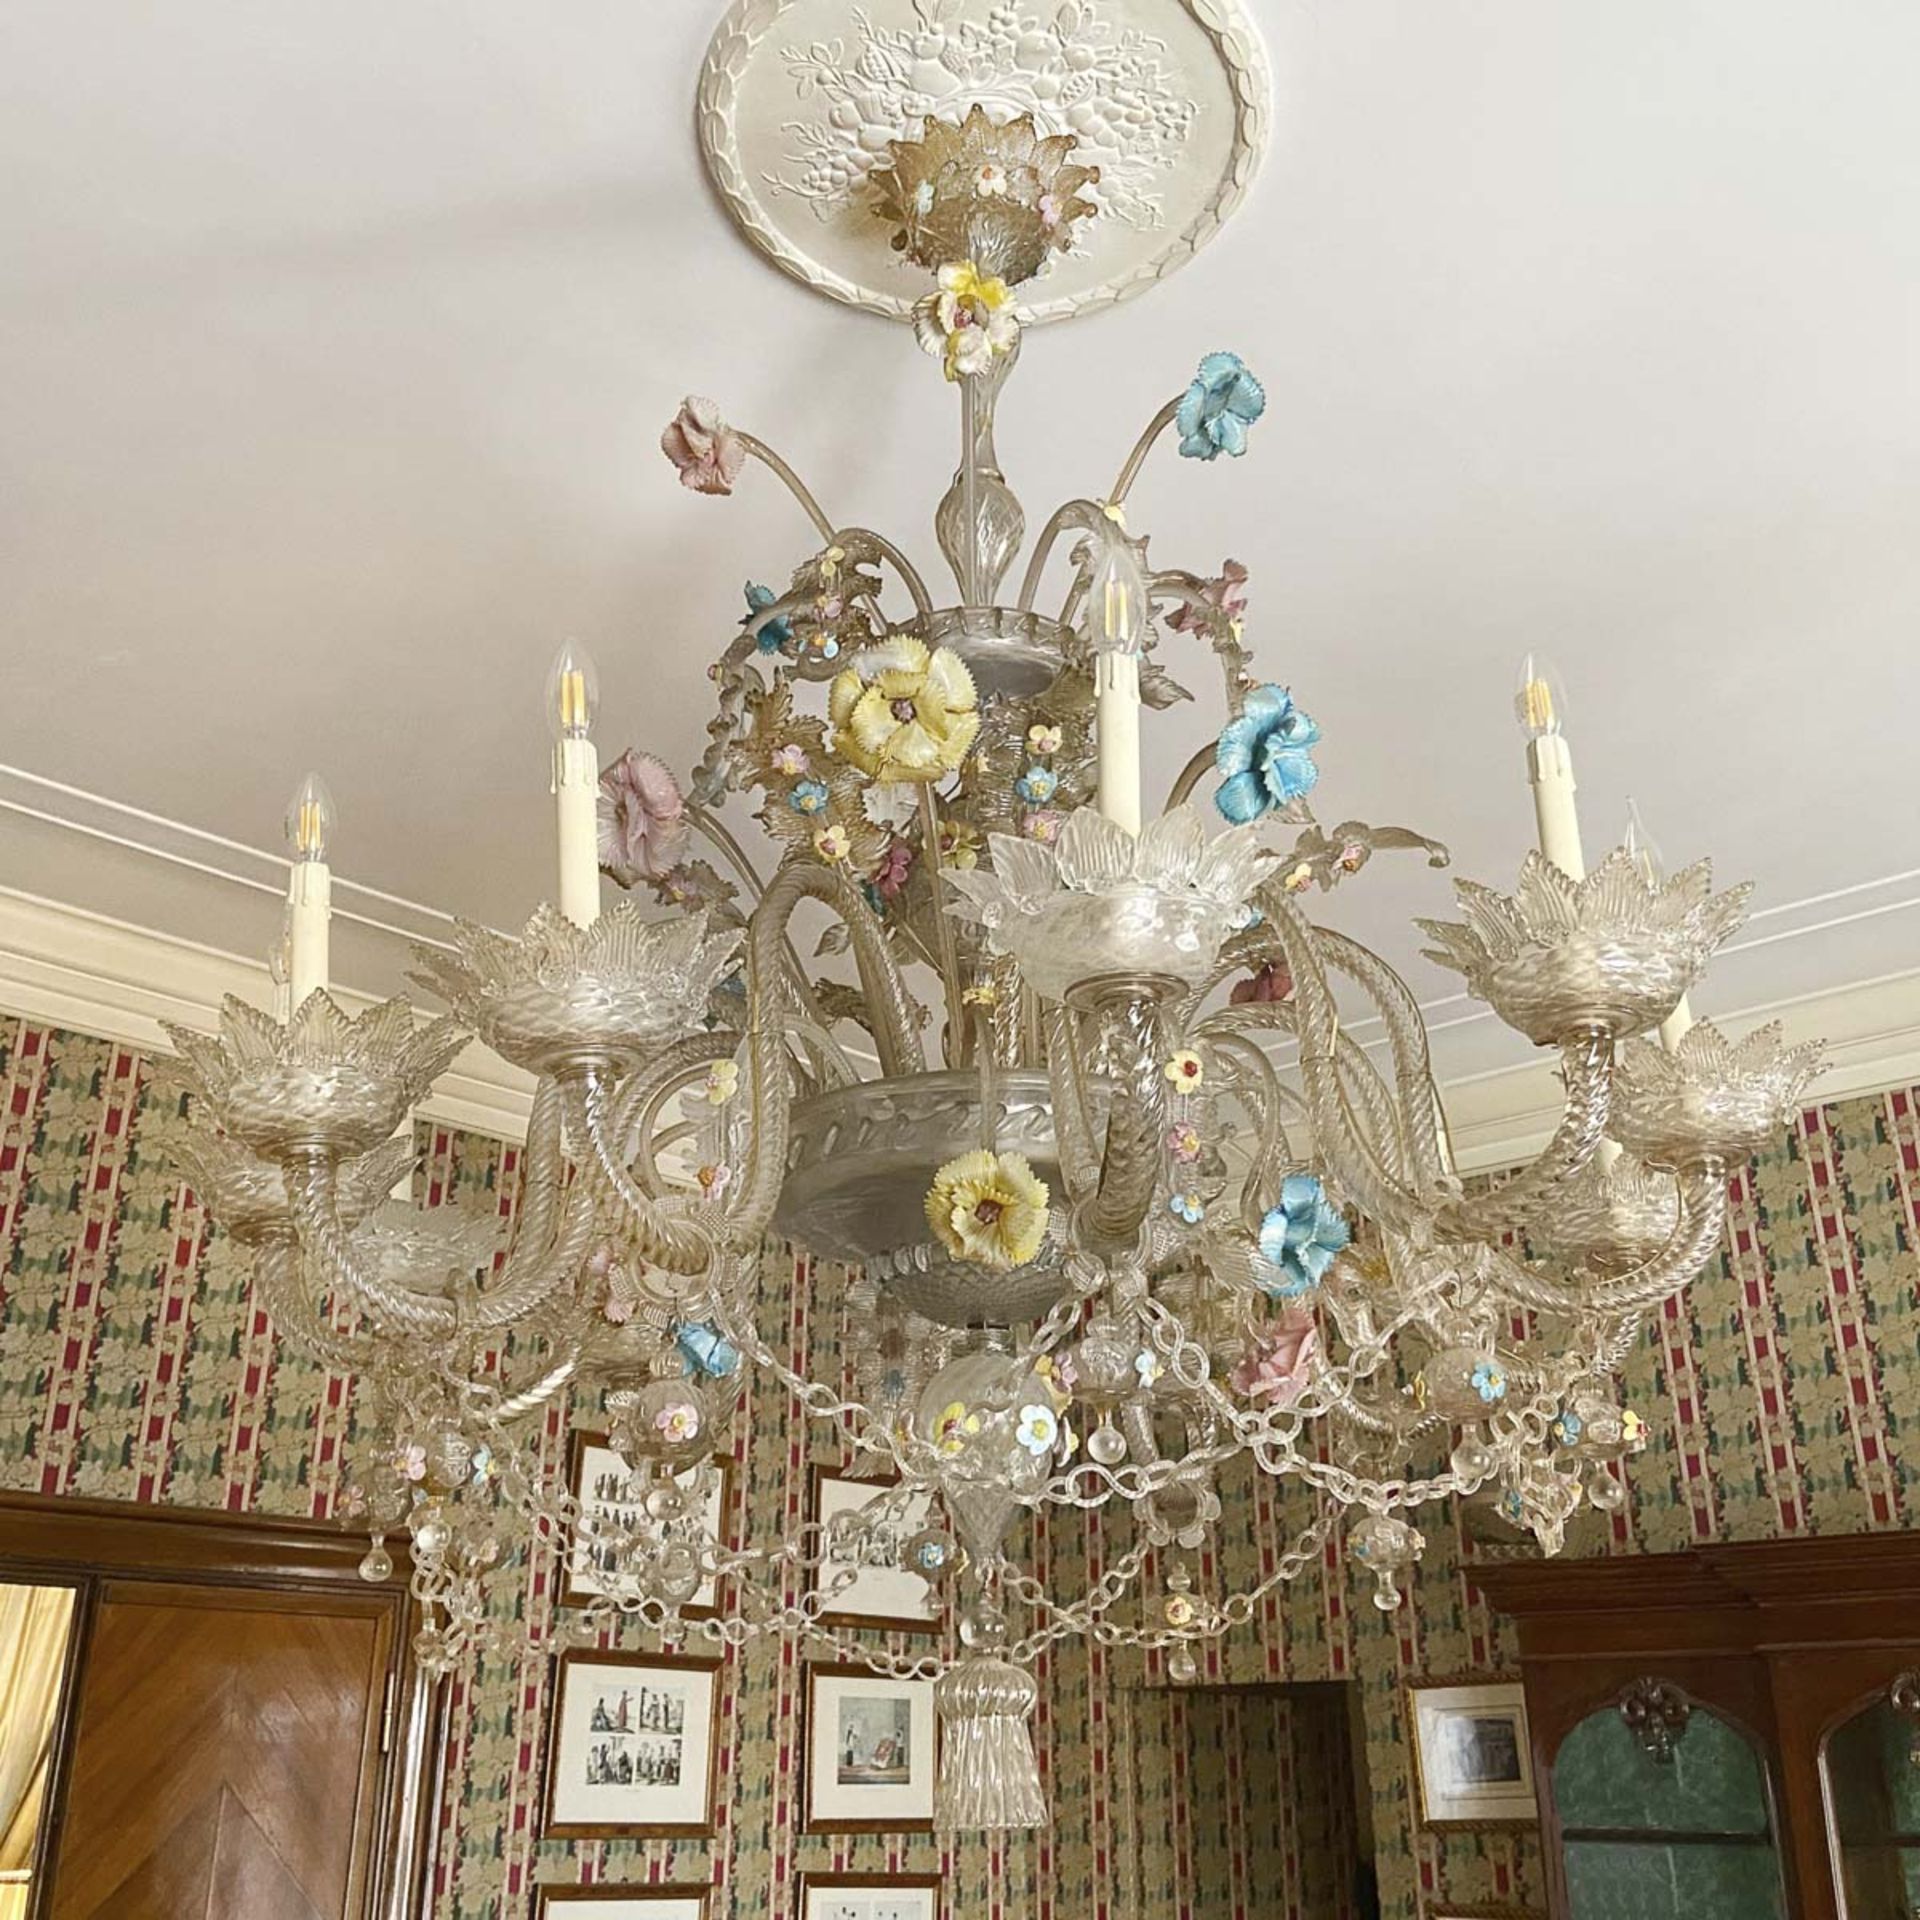 12-light chandelier in transparent glass and polychrome glass - Image 2 of 2